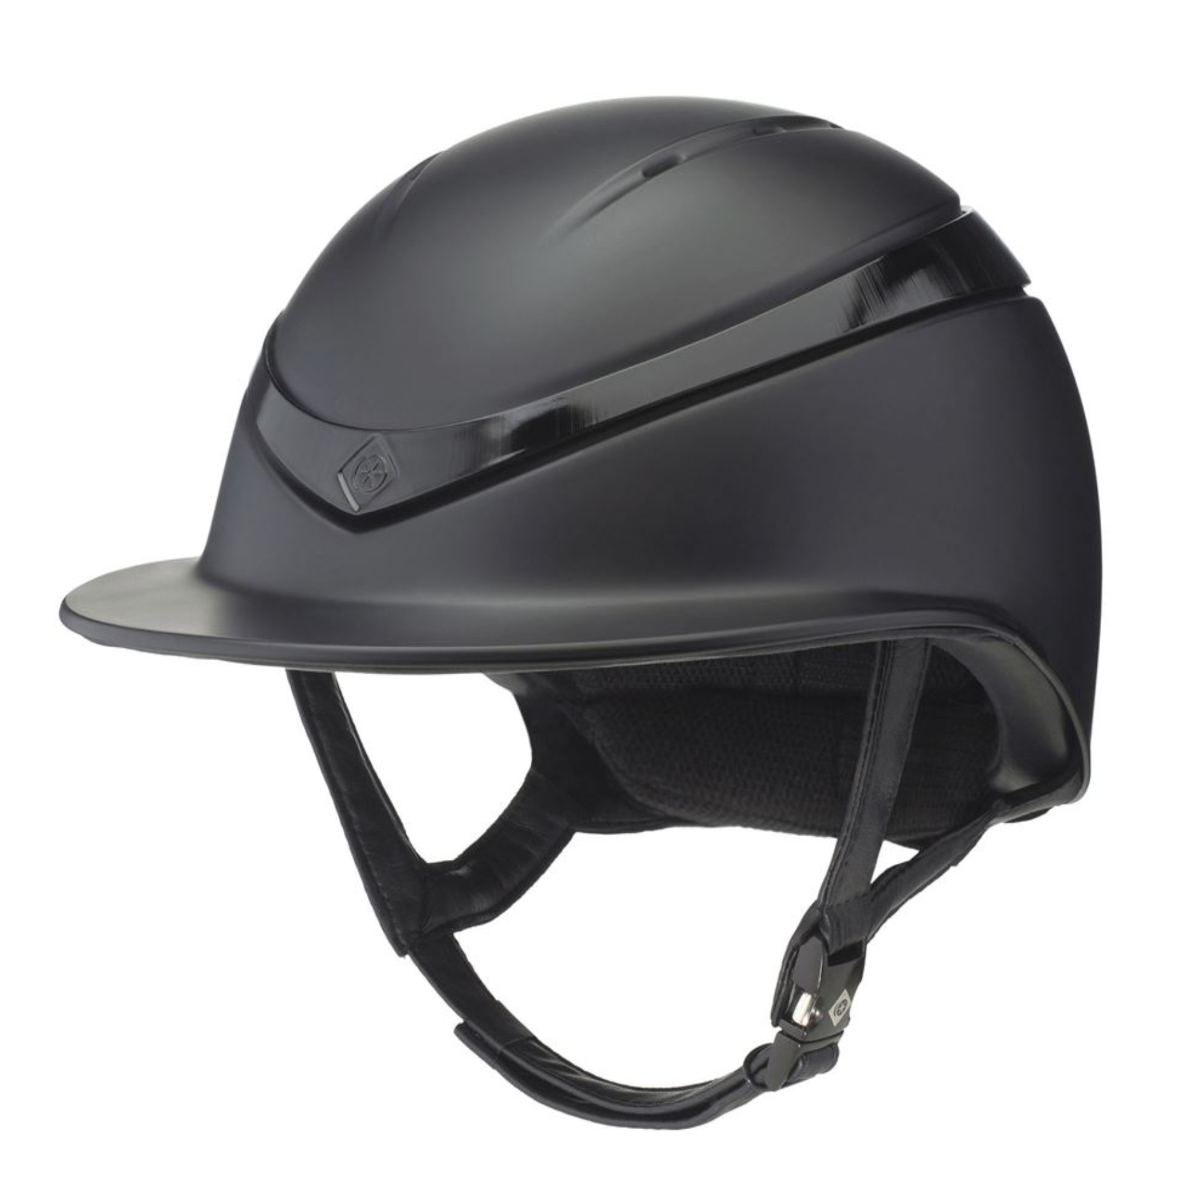 Charles Owen Halo Luxe Helmet With MIPS